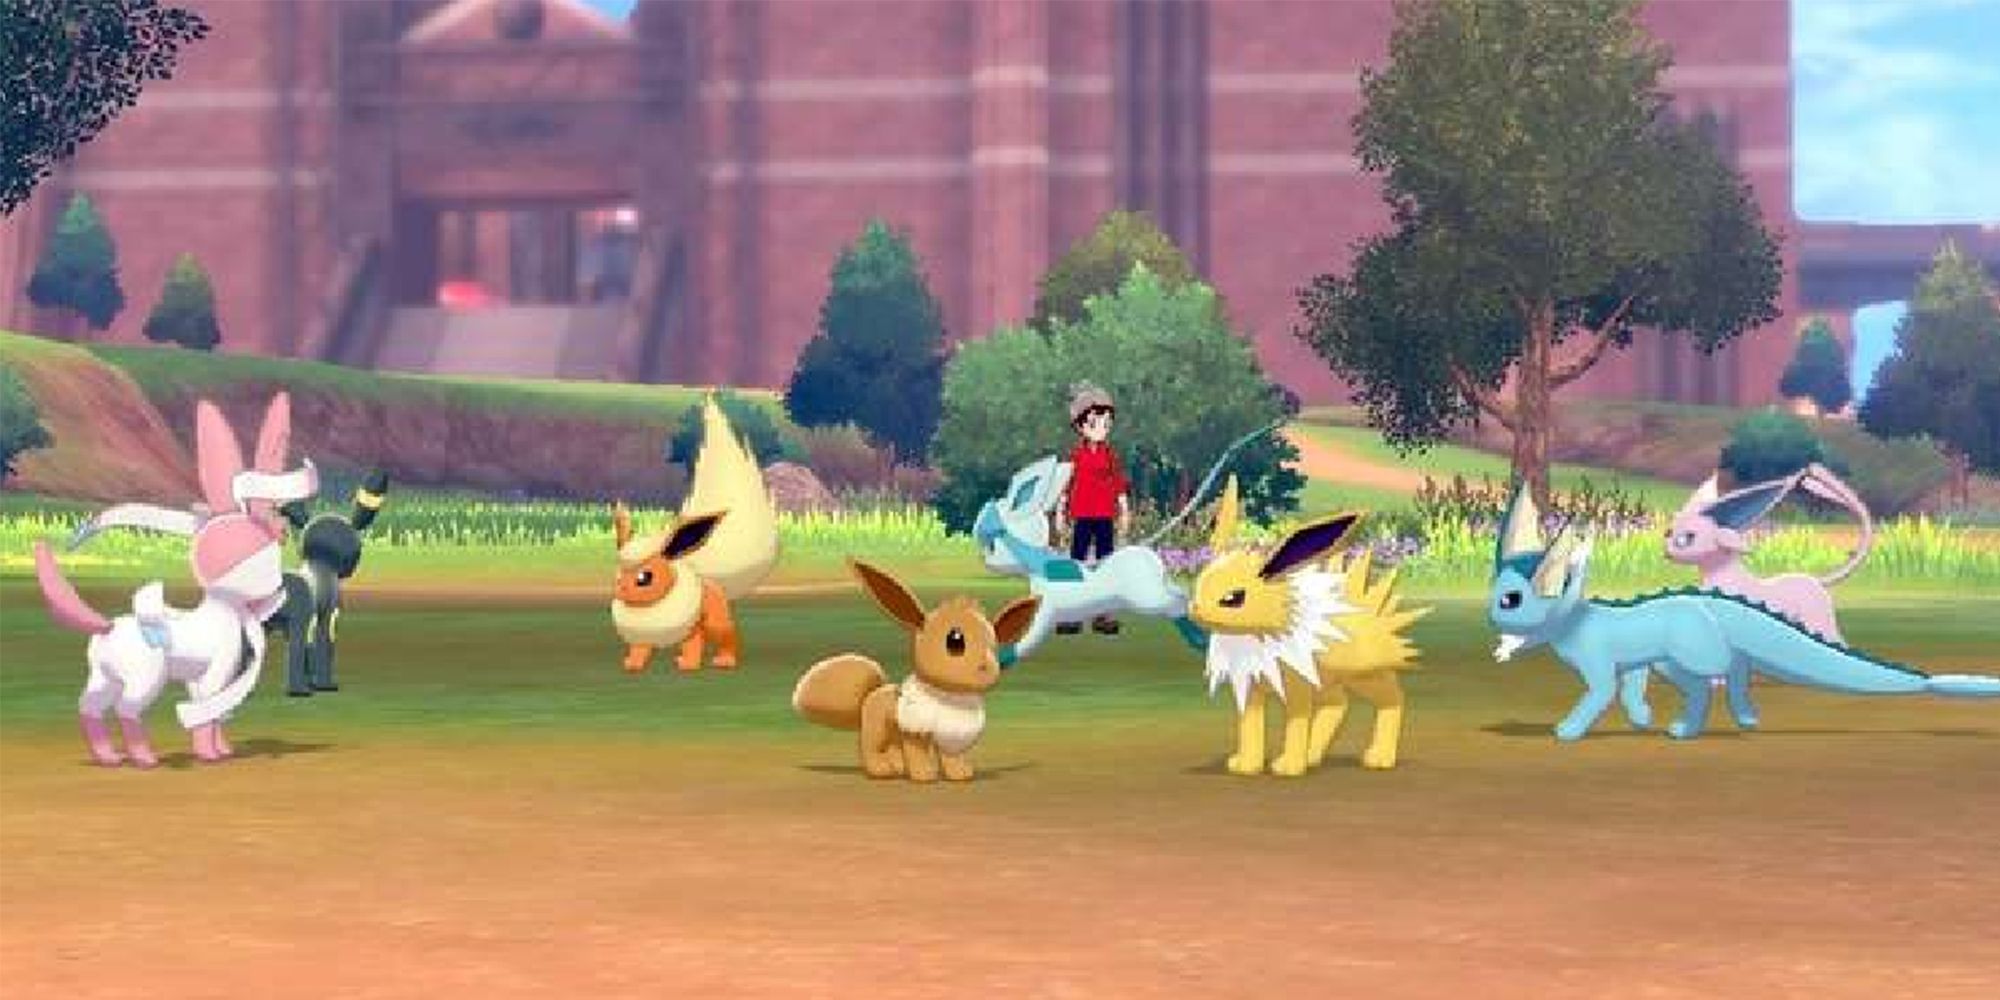 Pokemon Sword and Shield players can catch Shiny Eevee this week - CNET